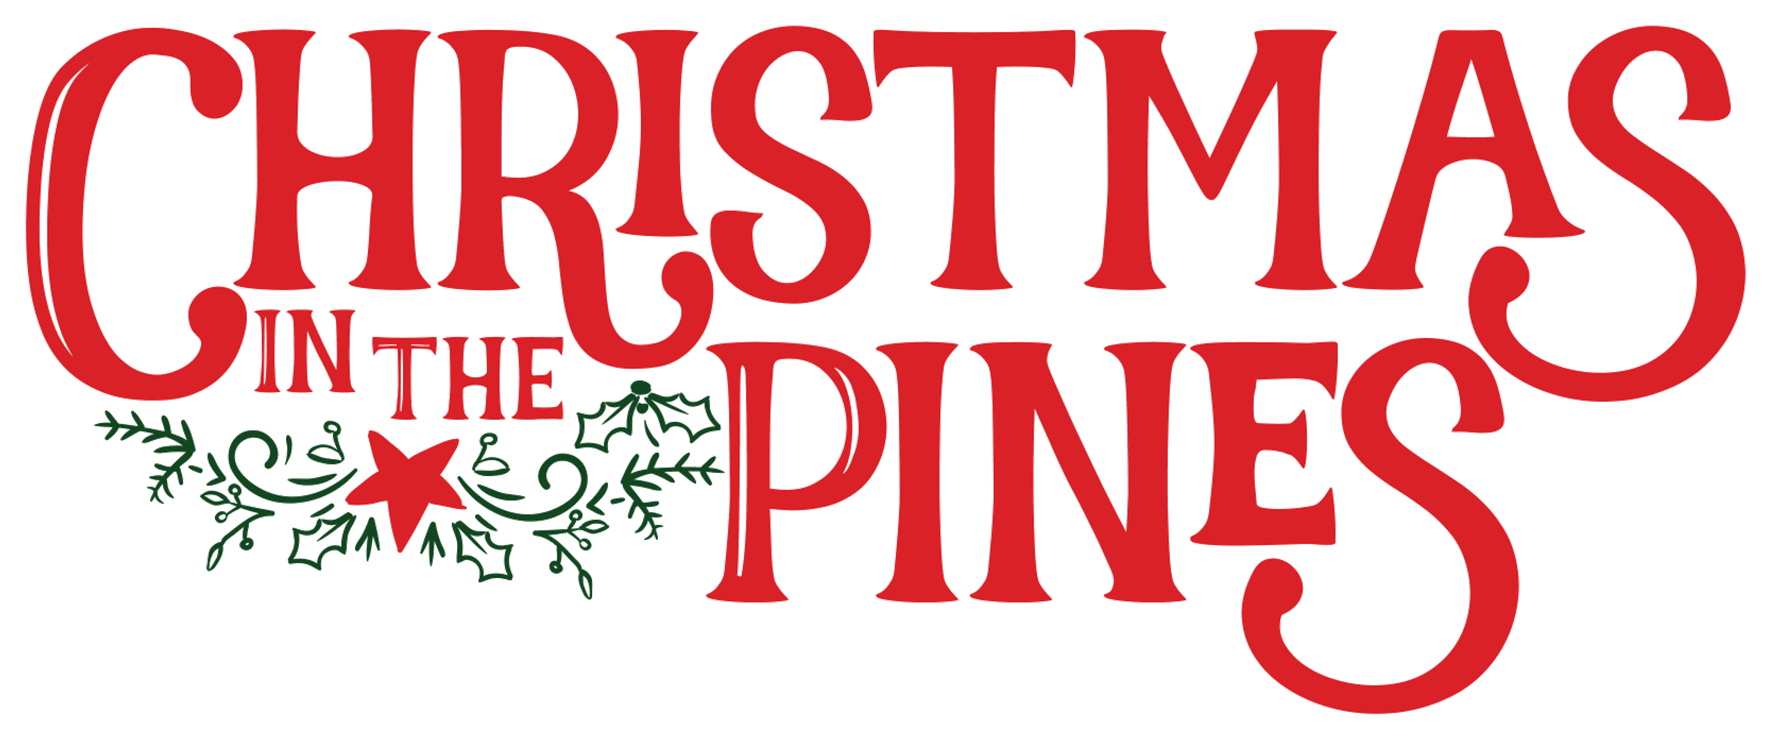 Christmas in the Pines logo